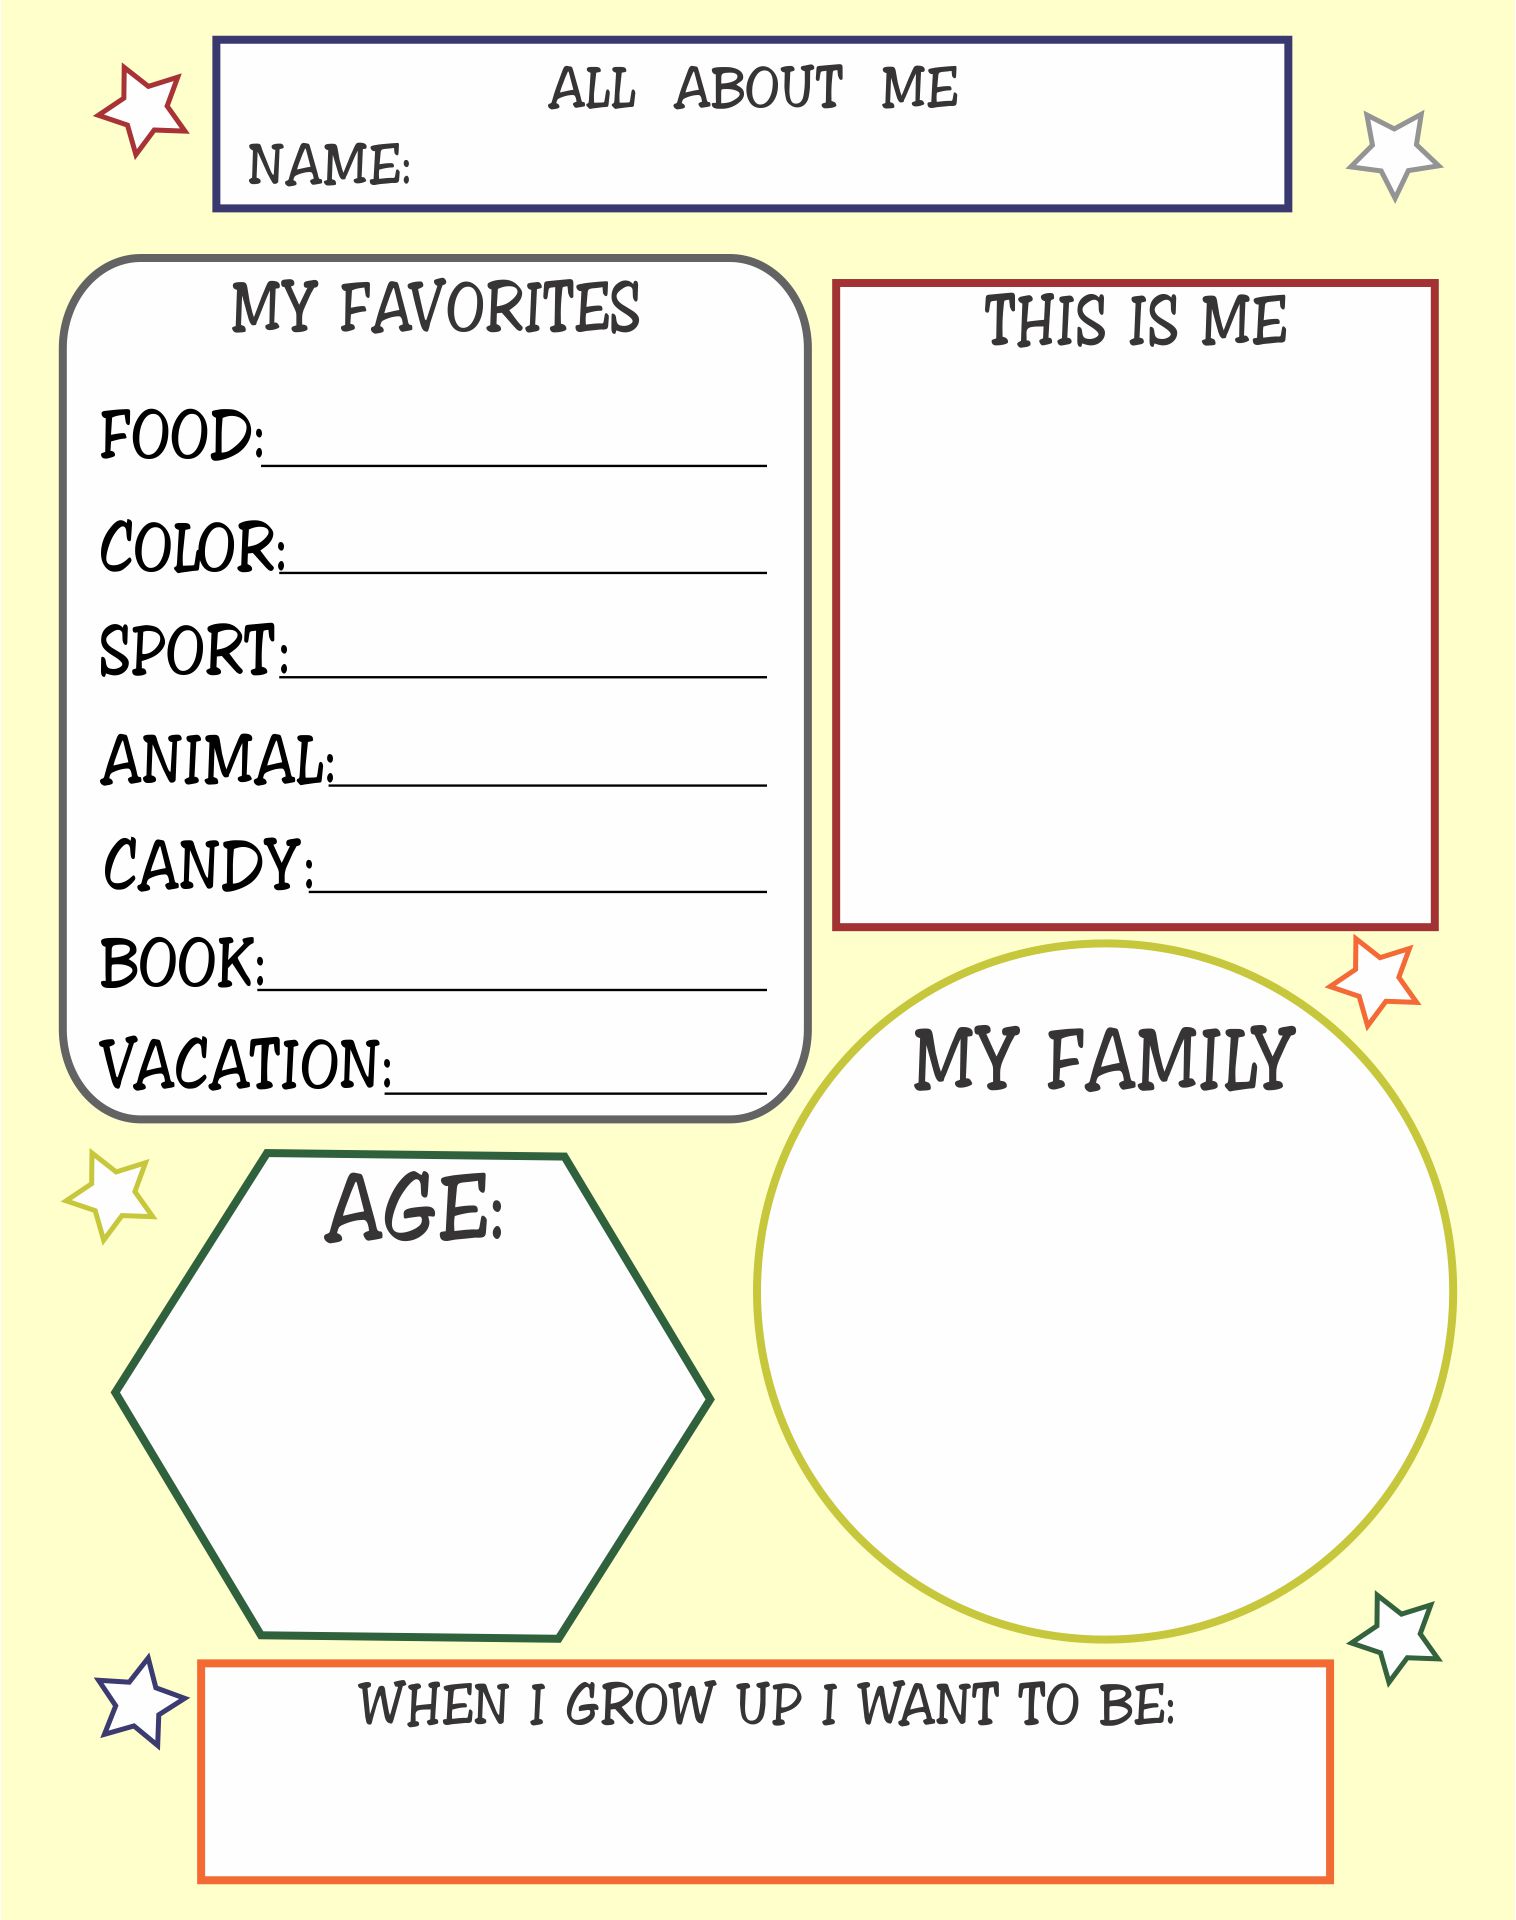 All About Me Booklet Template